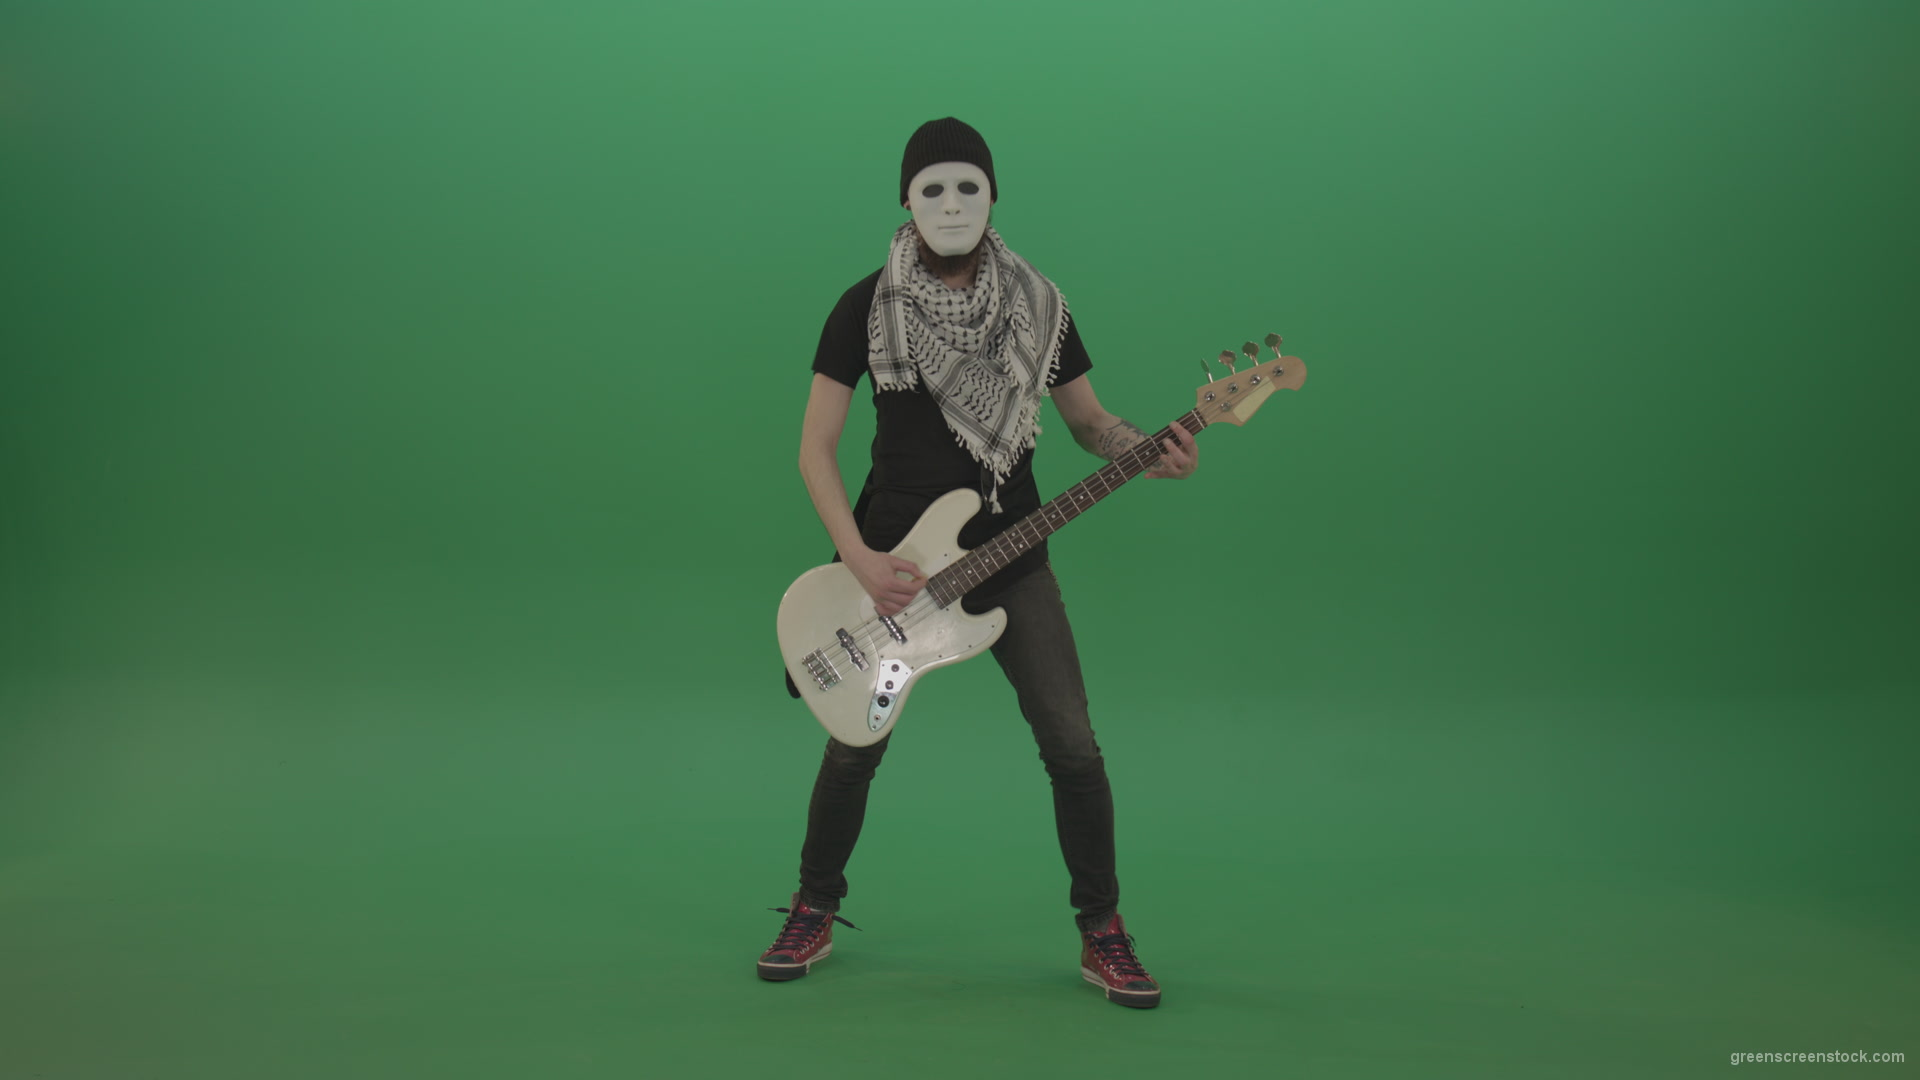 Bass-guitaris-in-full-size-play-white-guitar-in-white-mask-on-chromakey-green-screen_006 Green Screen Stock